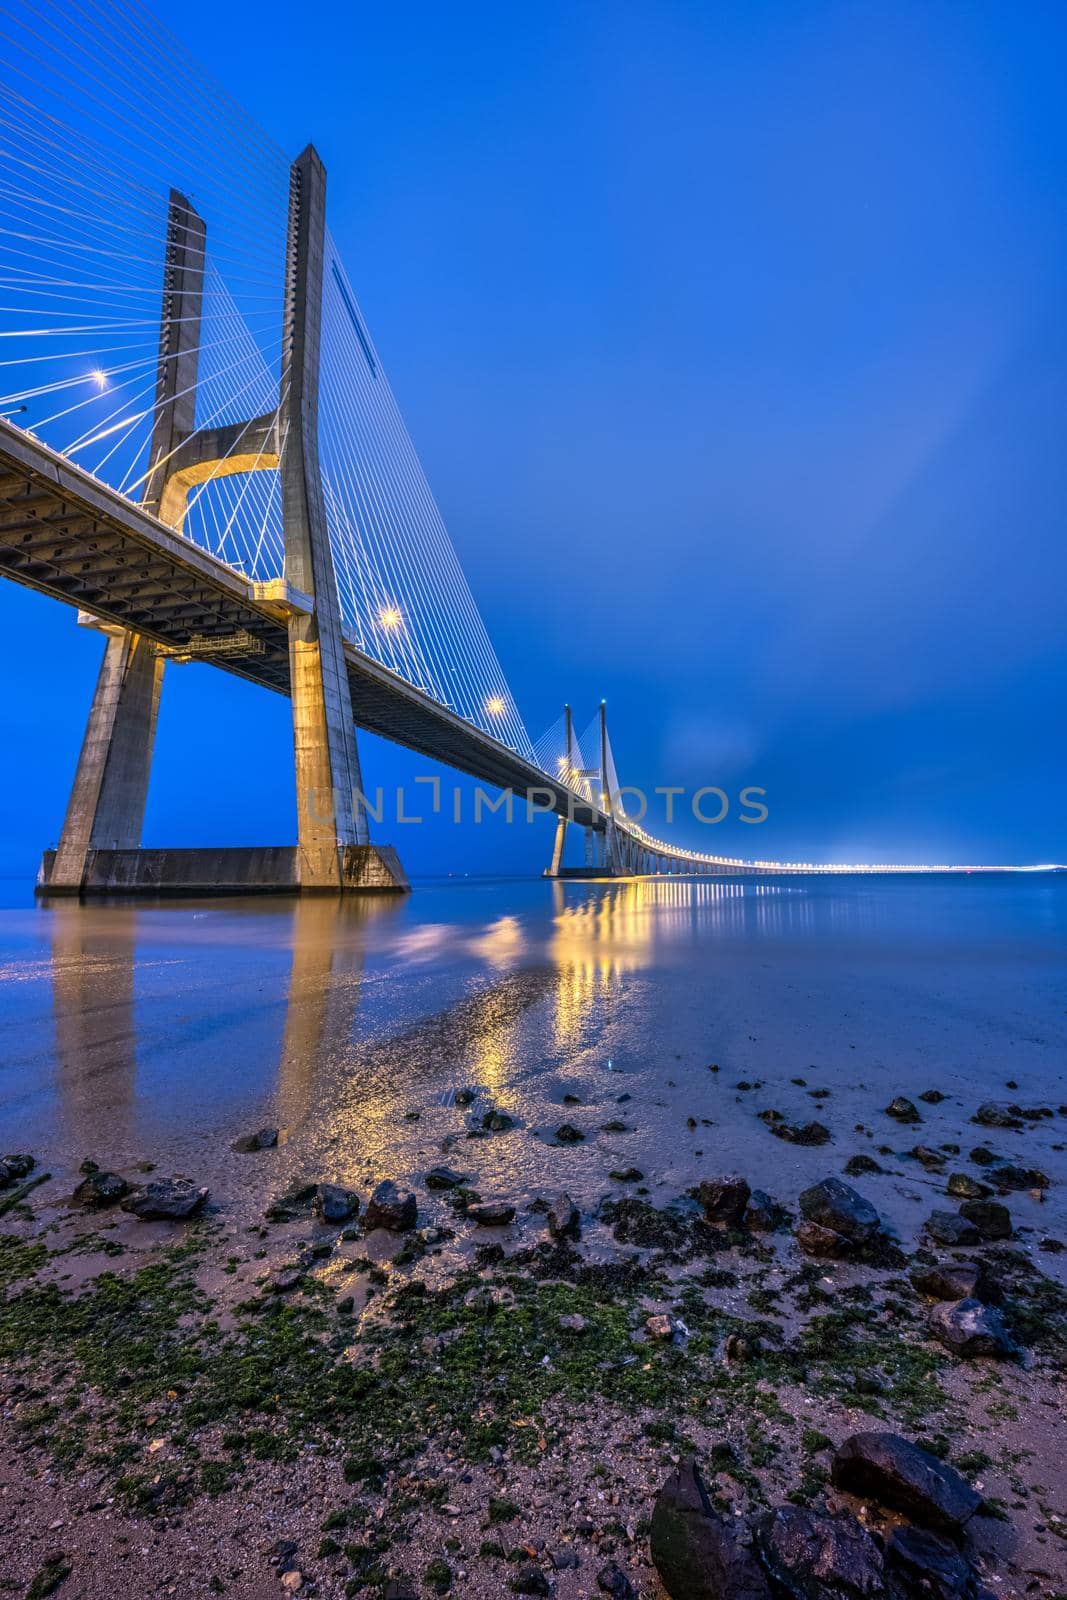 The imposing cable-stayed Vasco da Gama bridge across the river Tagus in Lisbon, Portugal, at dawn